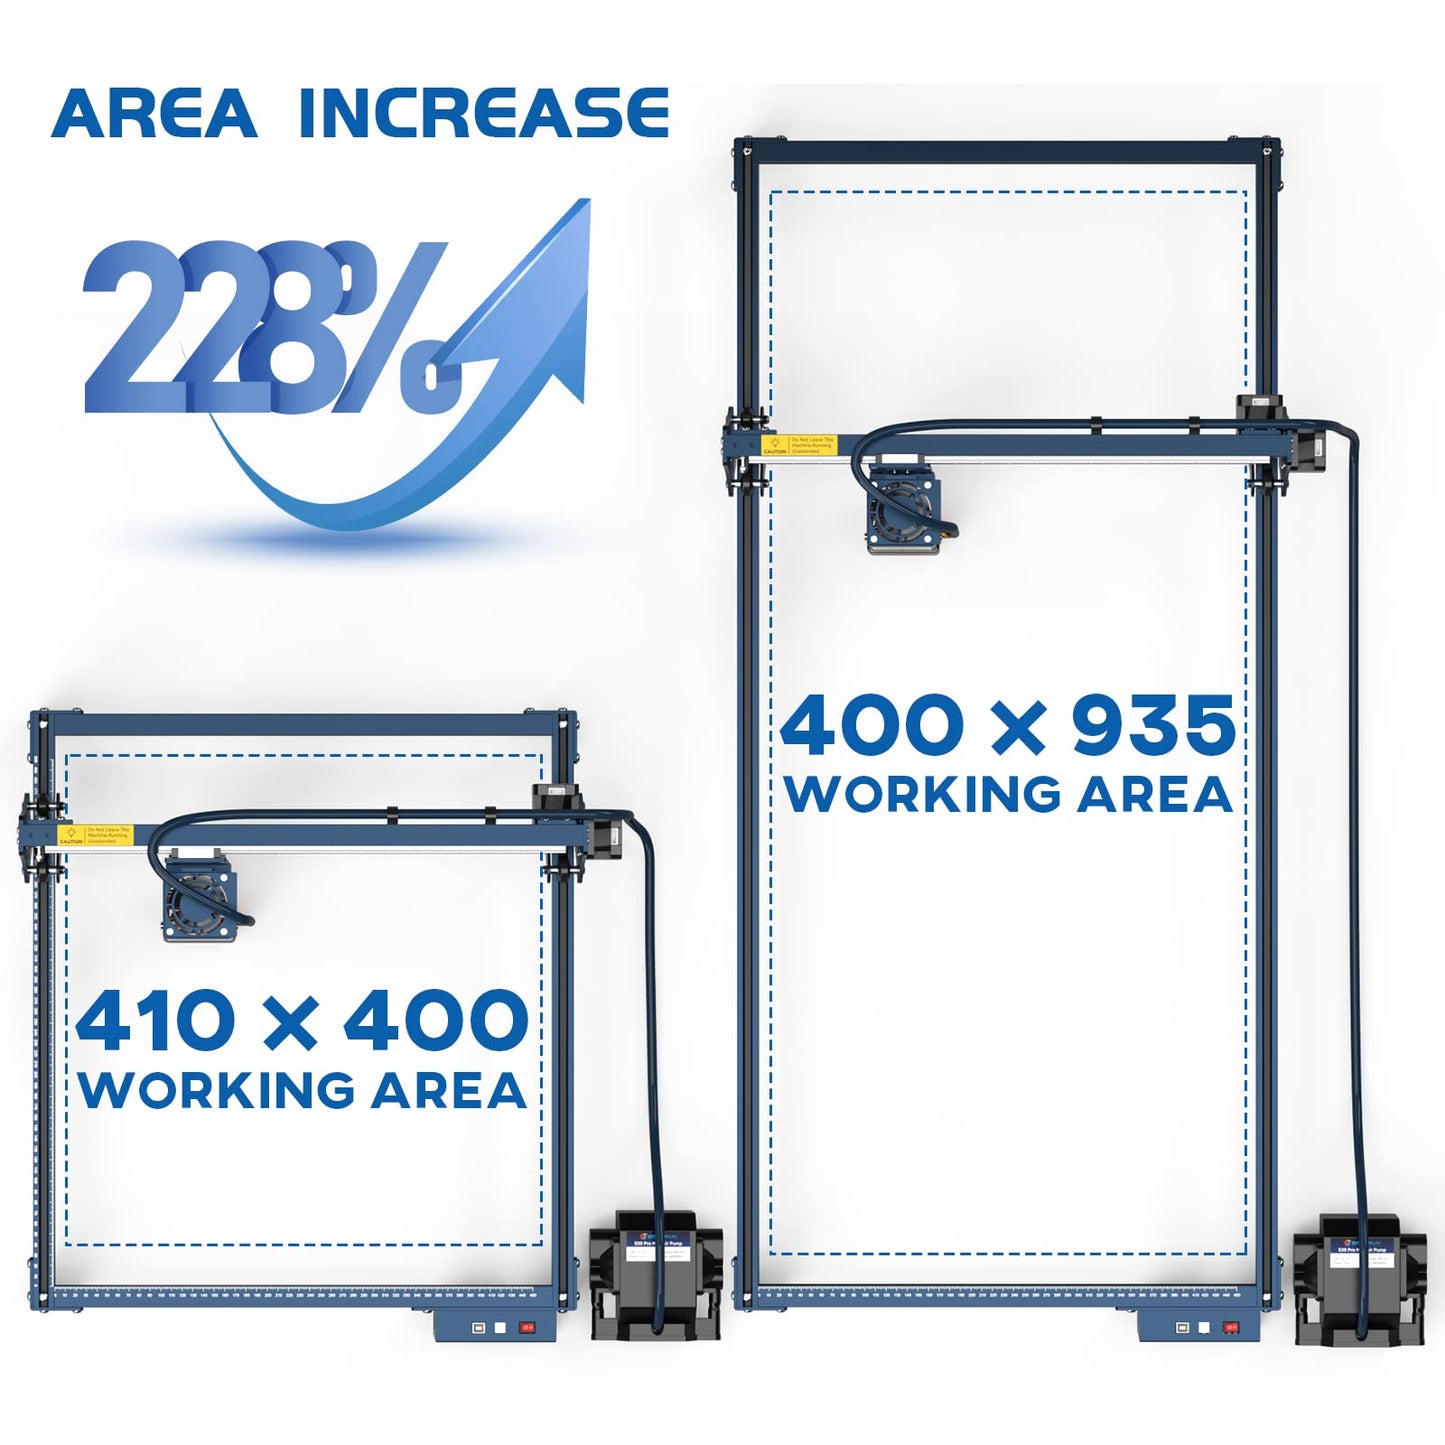 Sculpfun Extension Kit, Extend The Working Area of S30, S30 Pro and S30 Pro Max Laser Engraver to 935x400mm(36.8"X16.14") for Larger and Longer Laser